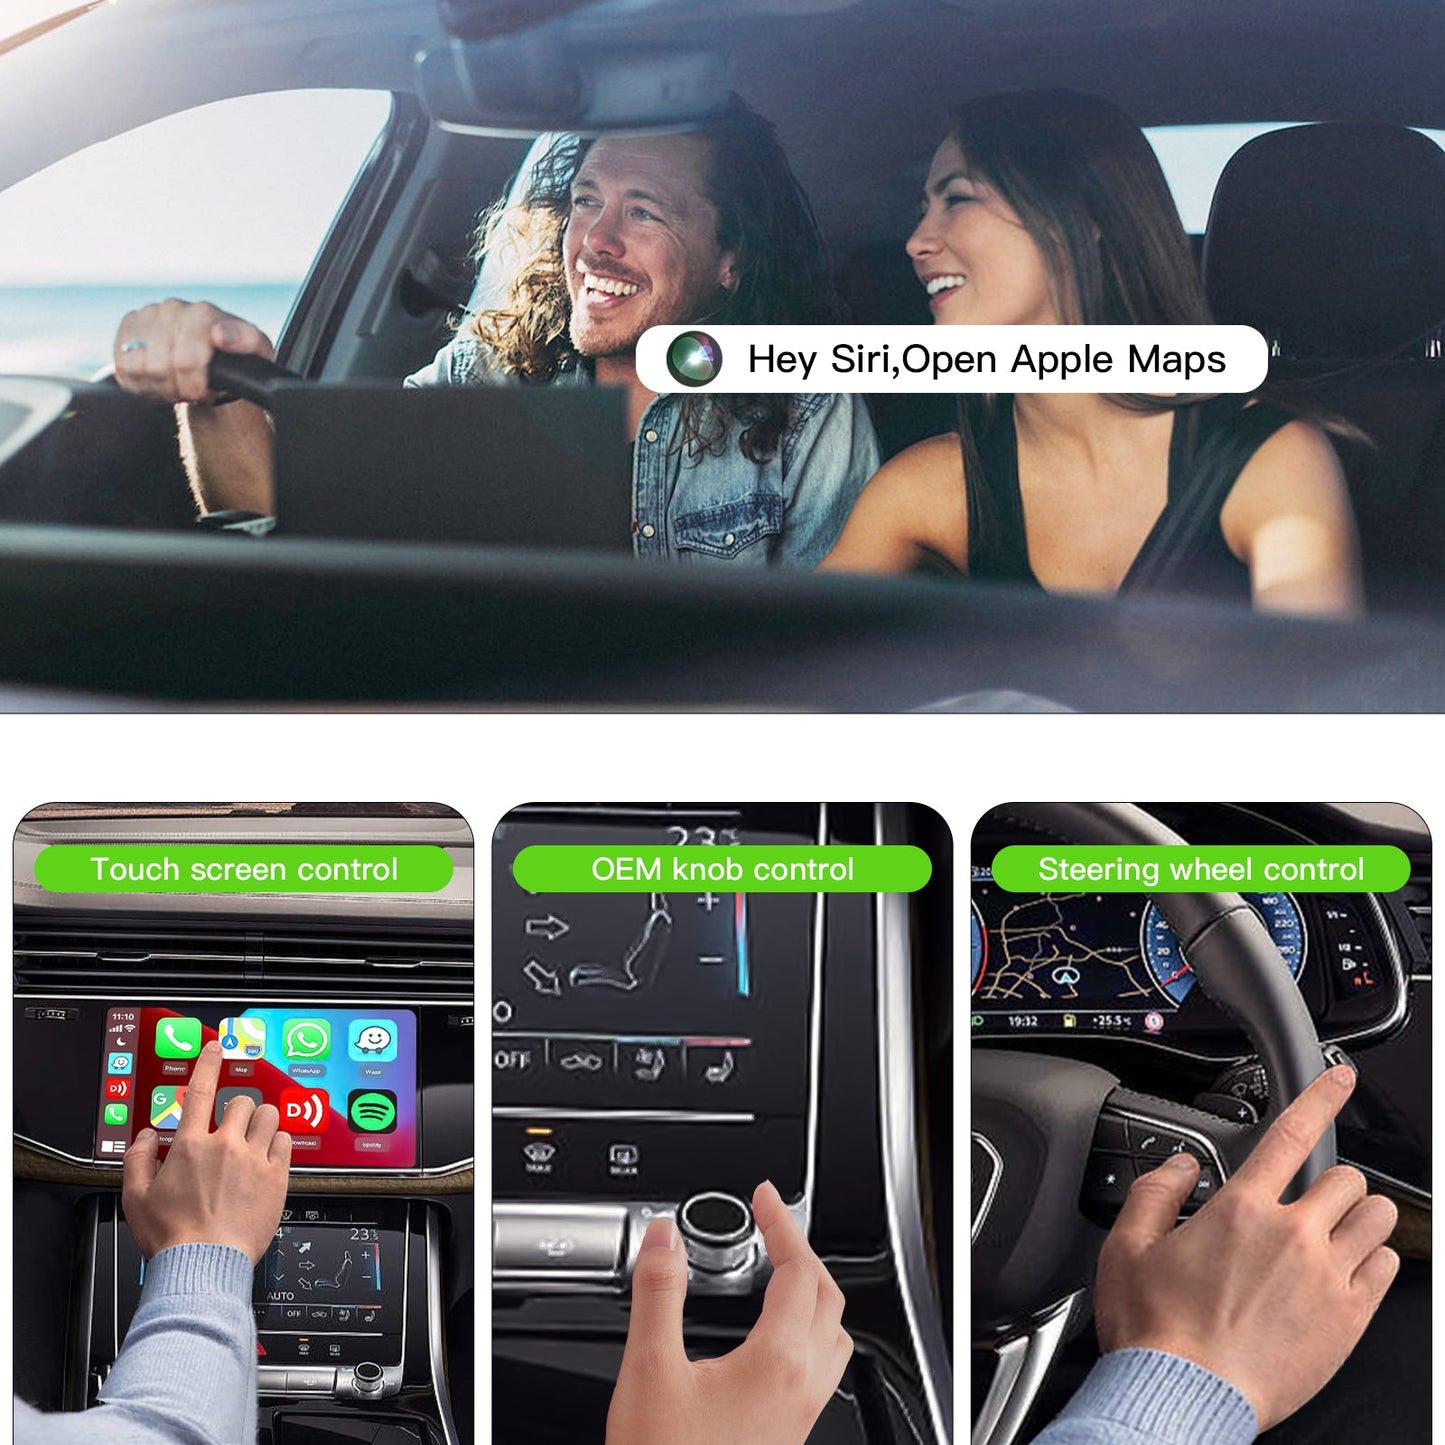 EXPLOTER 2-in-1 Wireless CarPlay Adapter & Android Auto CP-800-A 2023 Upgrade Dongle Convert Android 4.4+ System Car Radio to Newest Wireless CarPlay and Android auto, Plug & Play, Fast Auto Connect, work for iOS 12+ & Android 11